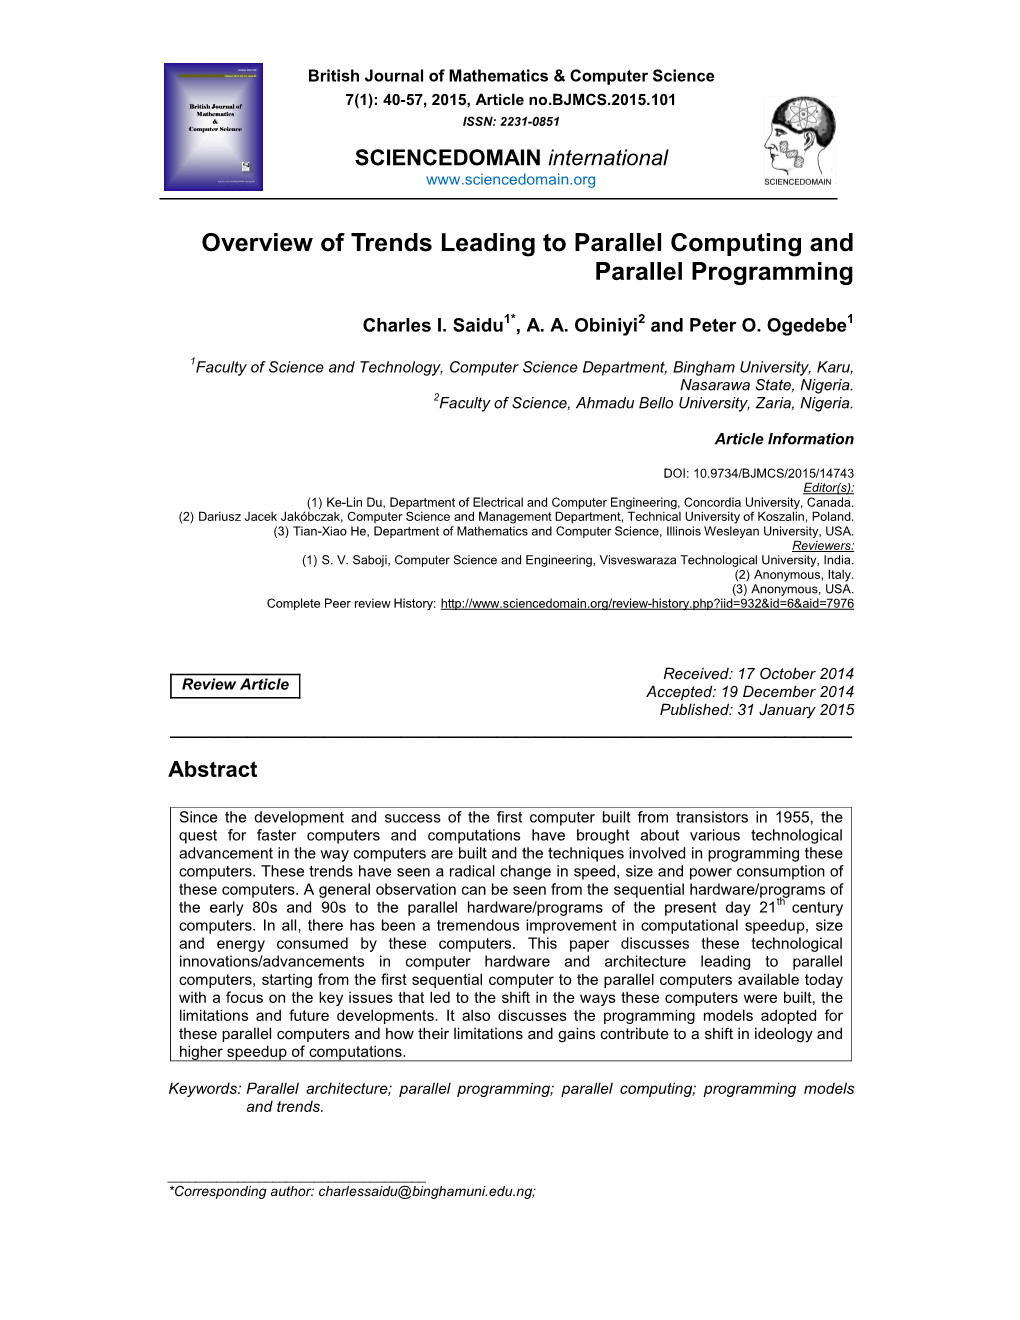 Overview of Trends Leading to Parallel Computing and Parallel Programming